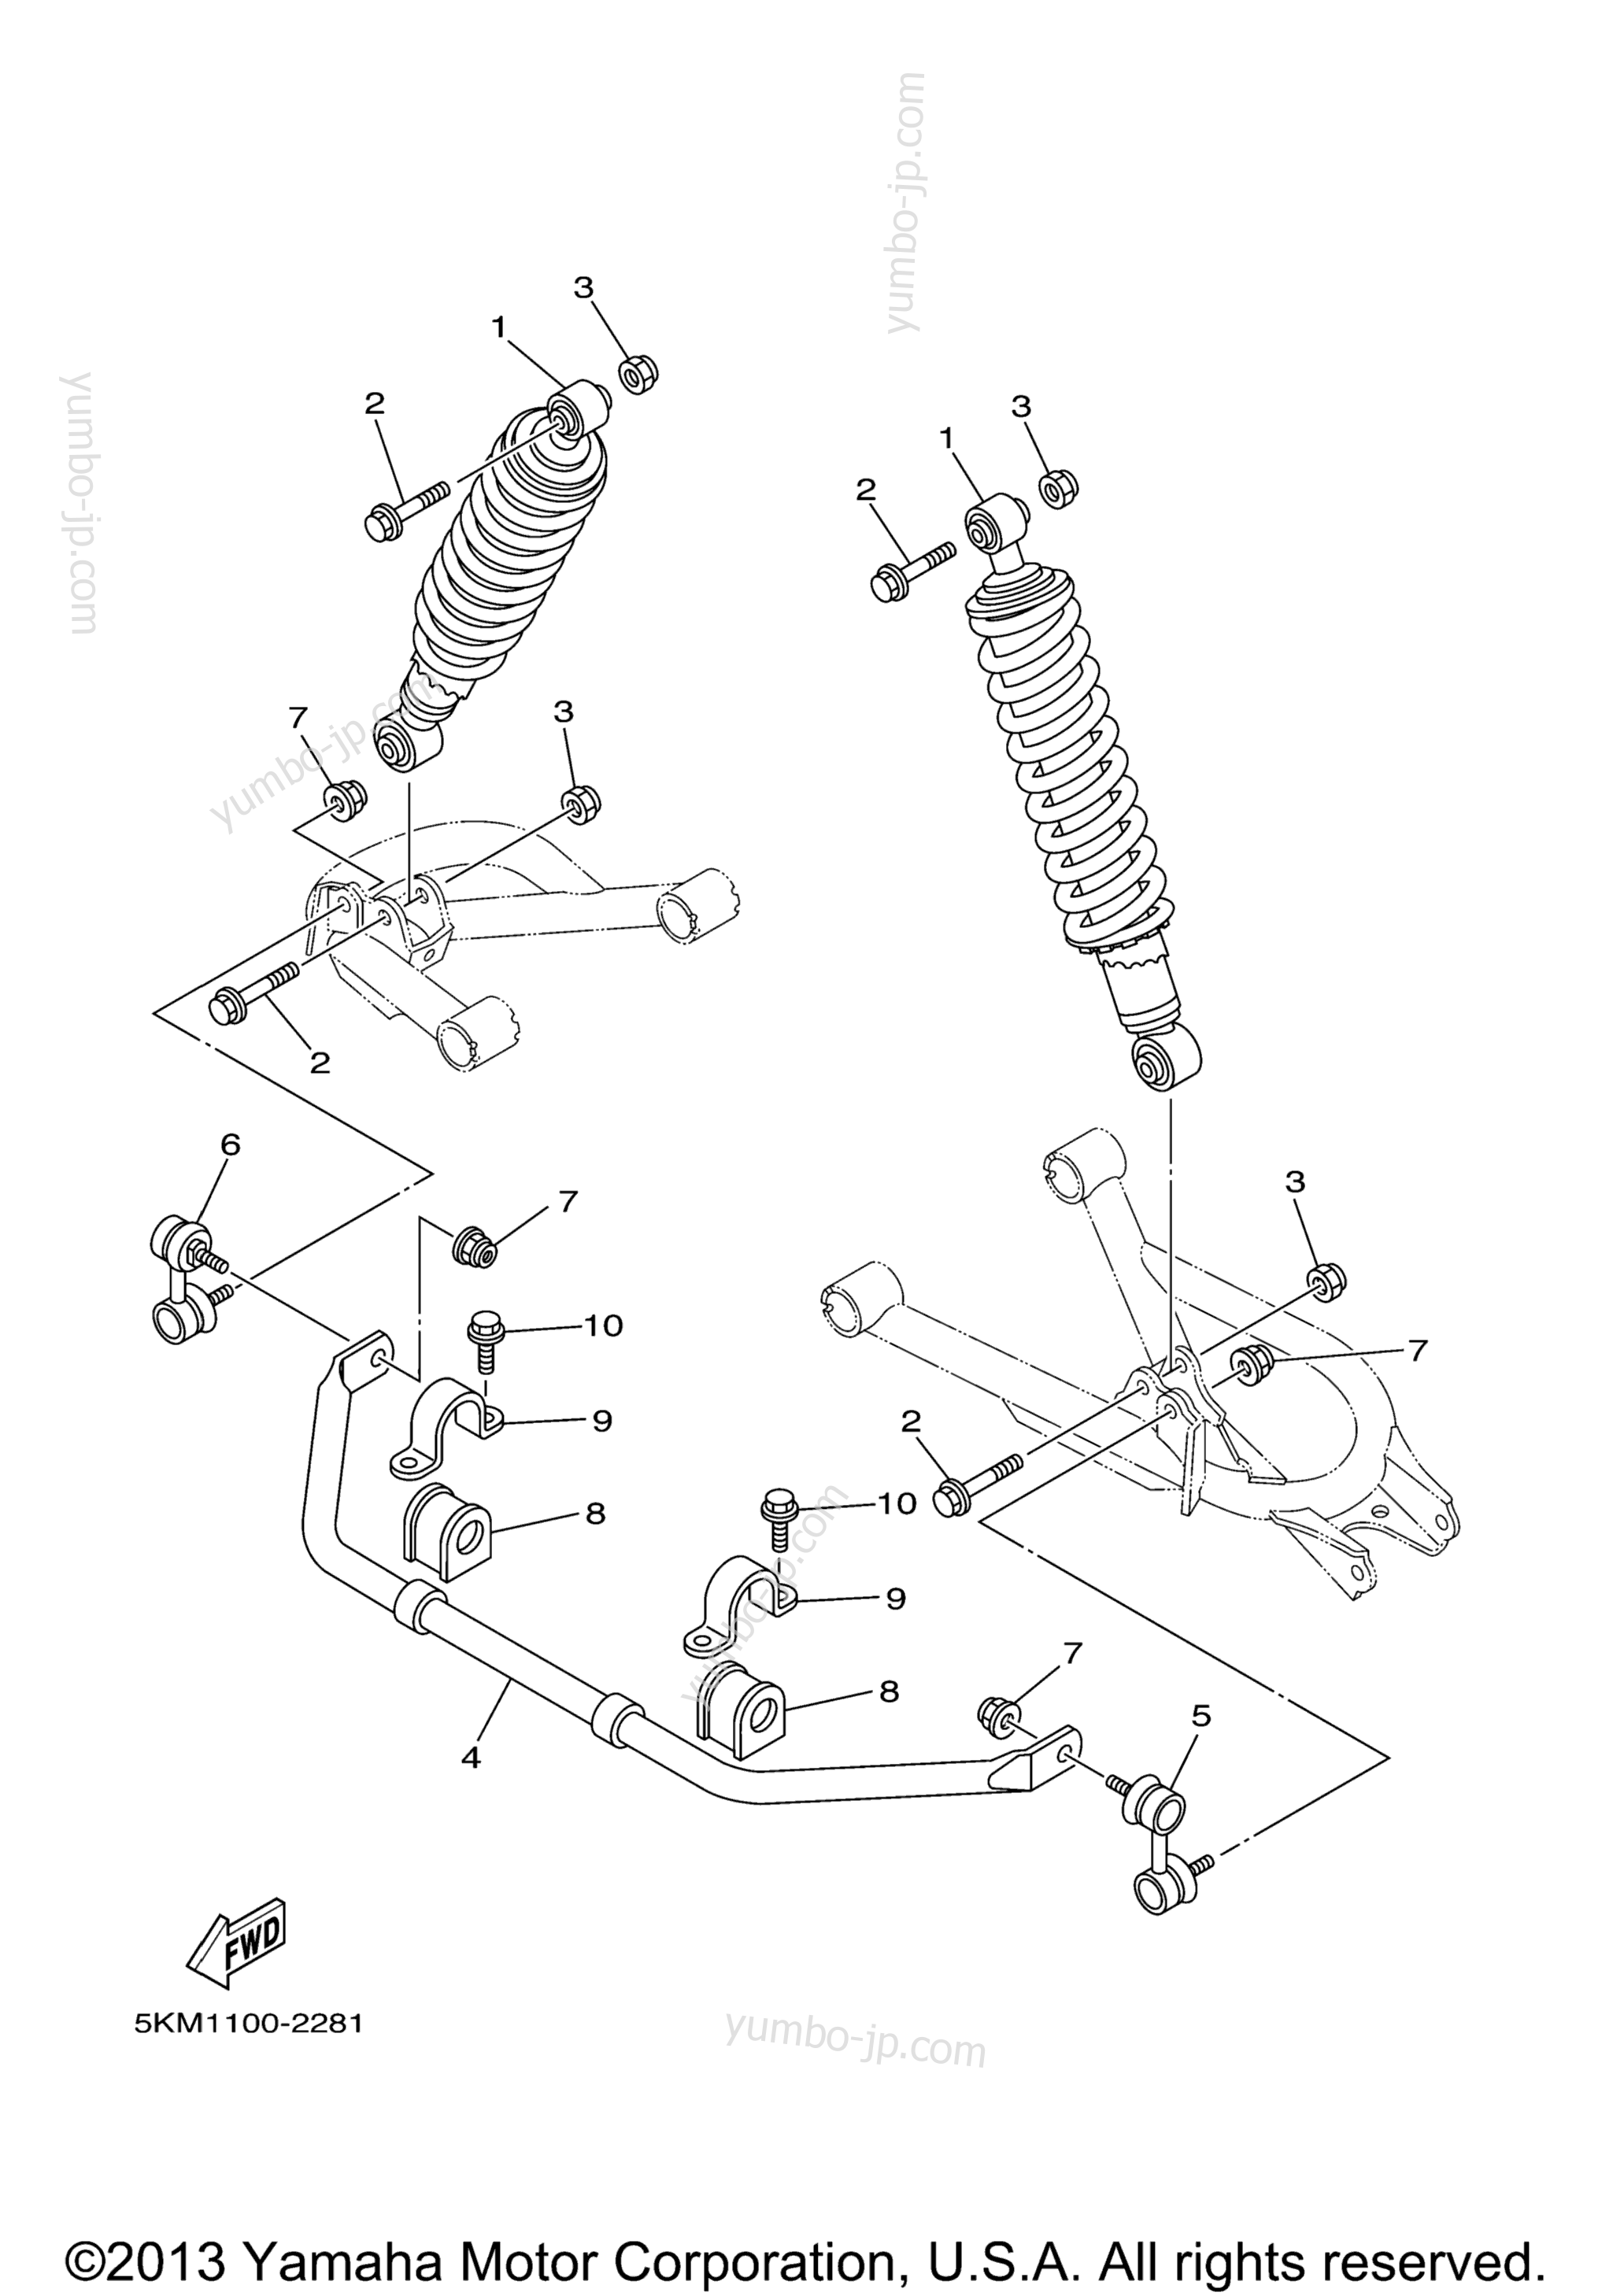 Rear Suspension for ATVs YAMAHA GRIZZLY 660 SE (YFM66FASET) 2005 year